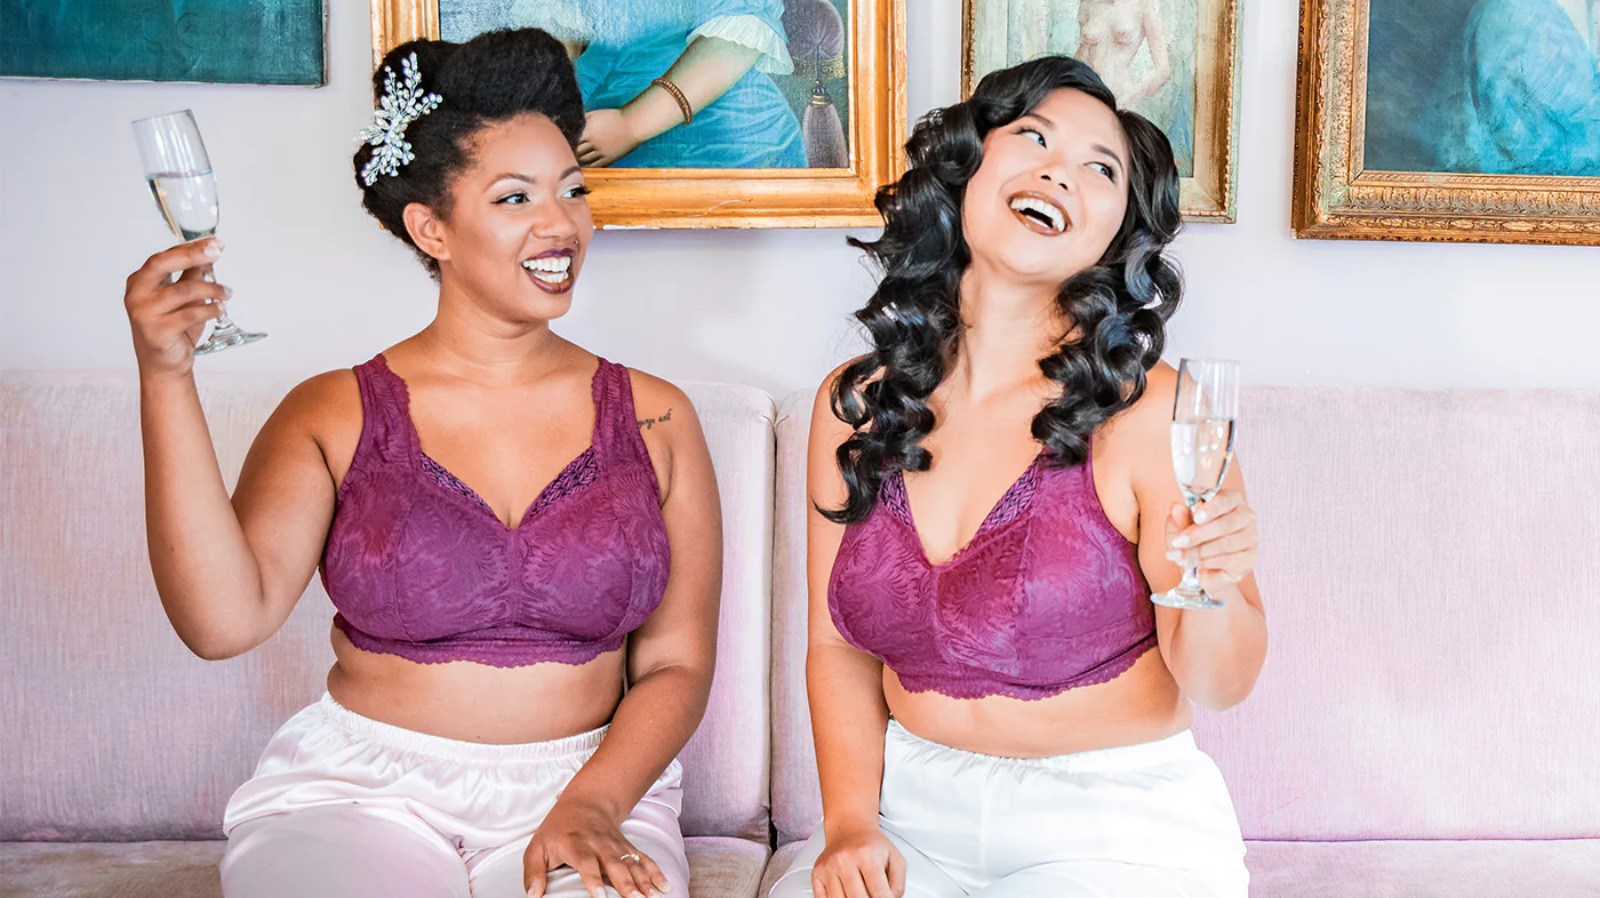 Behave Bras: What Happened To The Brand After Shark Tank?